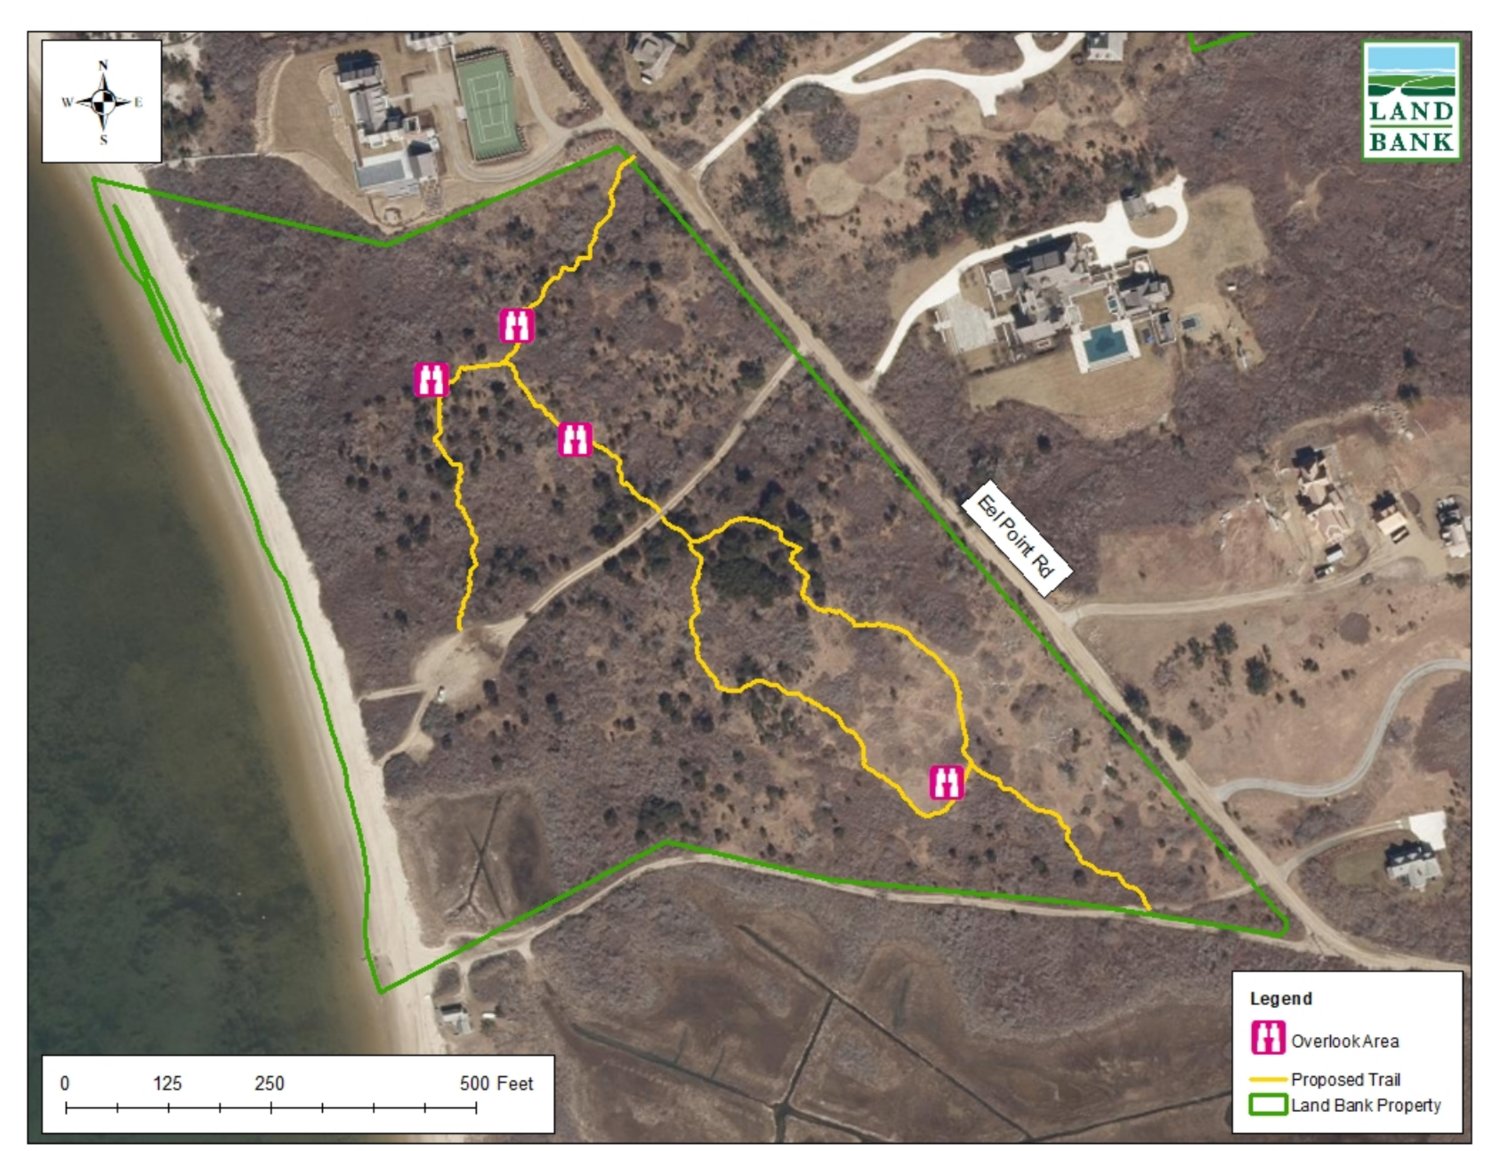 The Land Bank Commission approved the addition of walking trails at its 18-acre Wood property in Warren’s Landing.